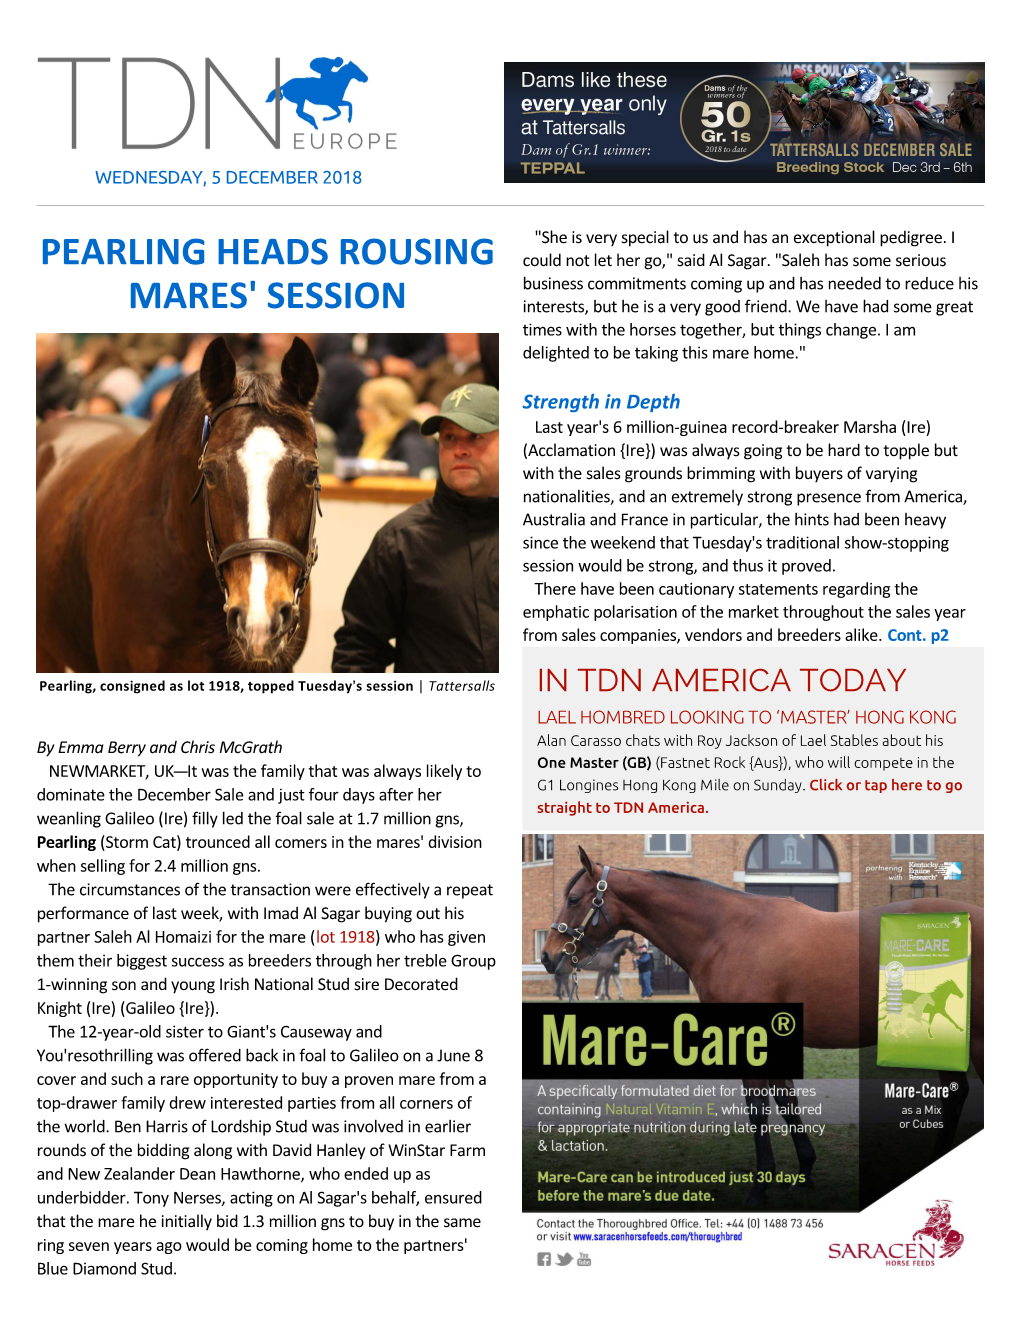 Pearling Heads Rousing Mares' Session